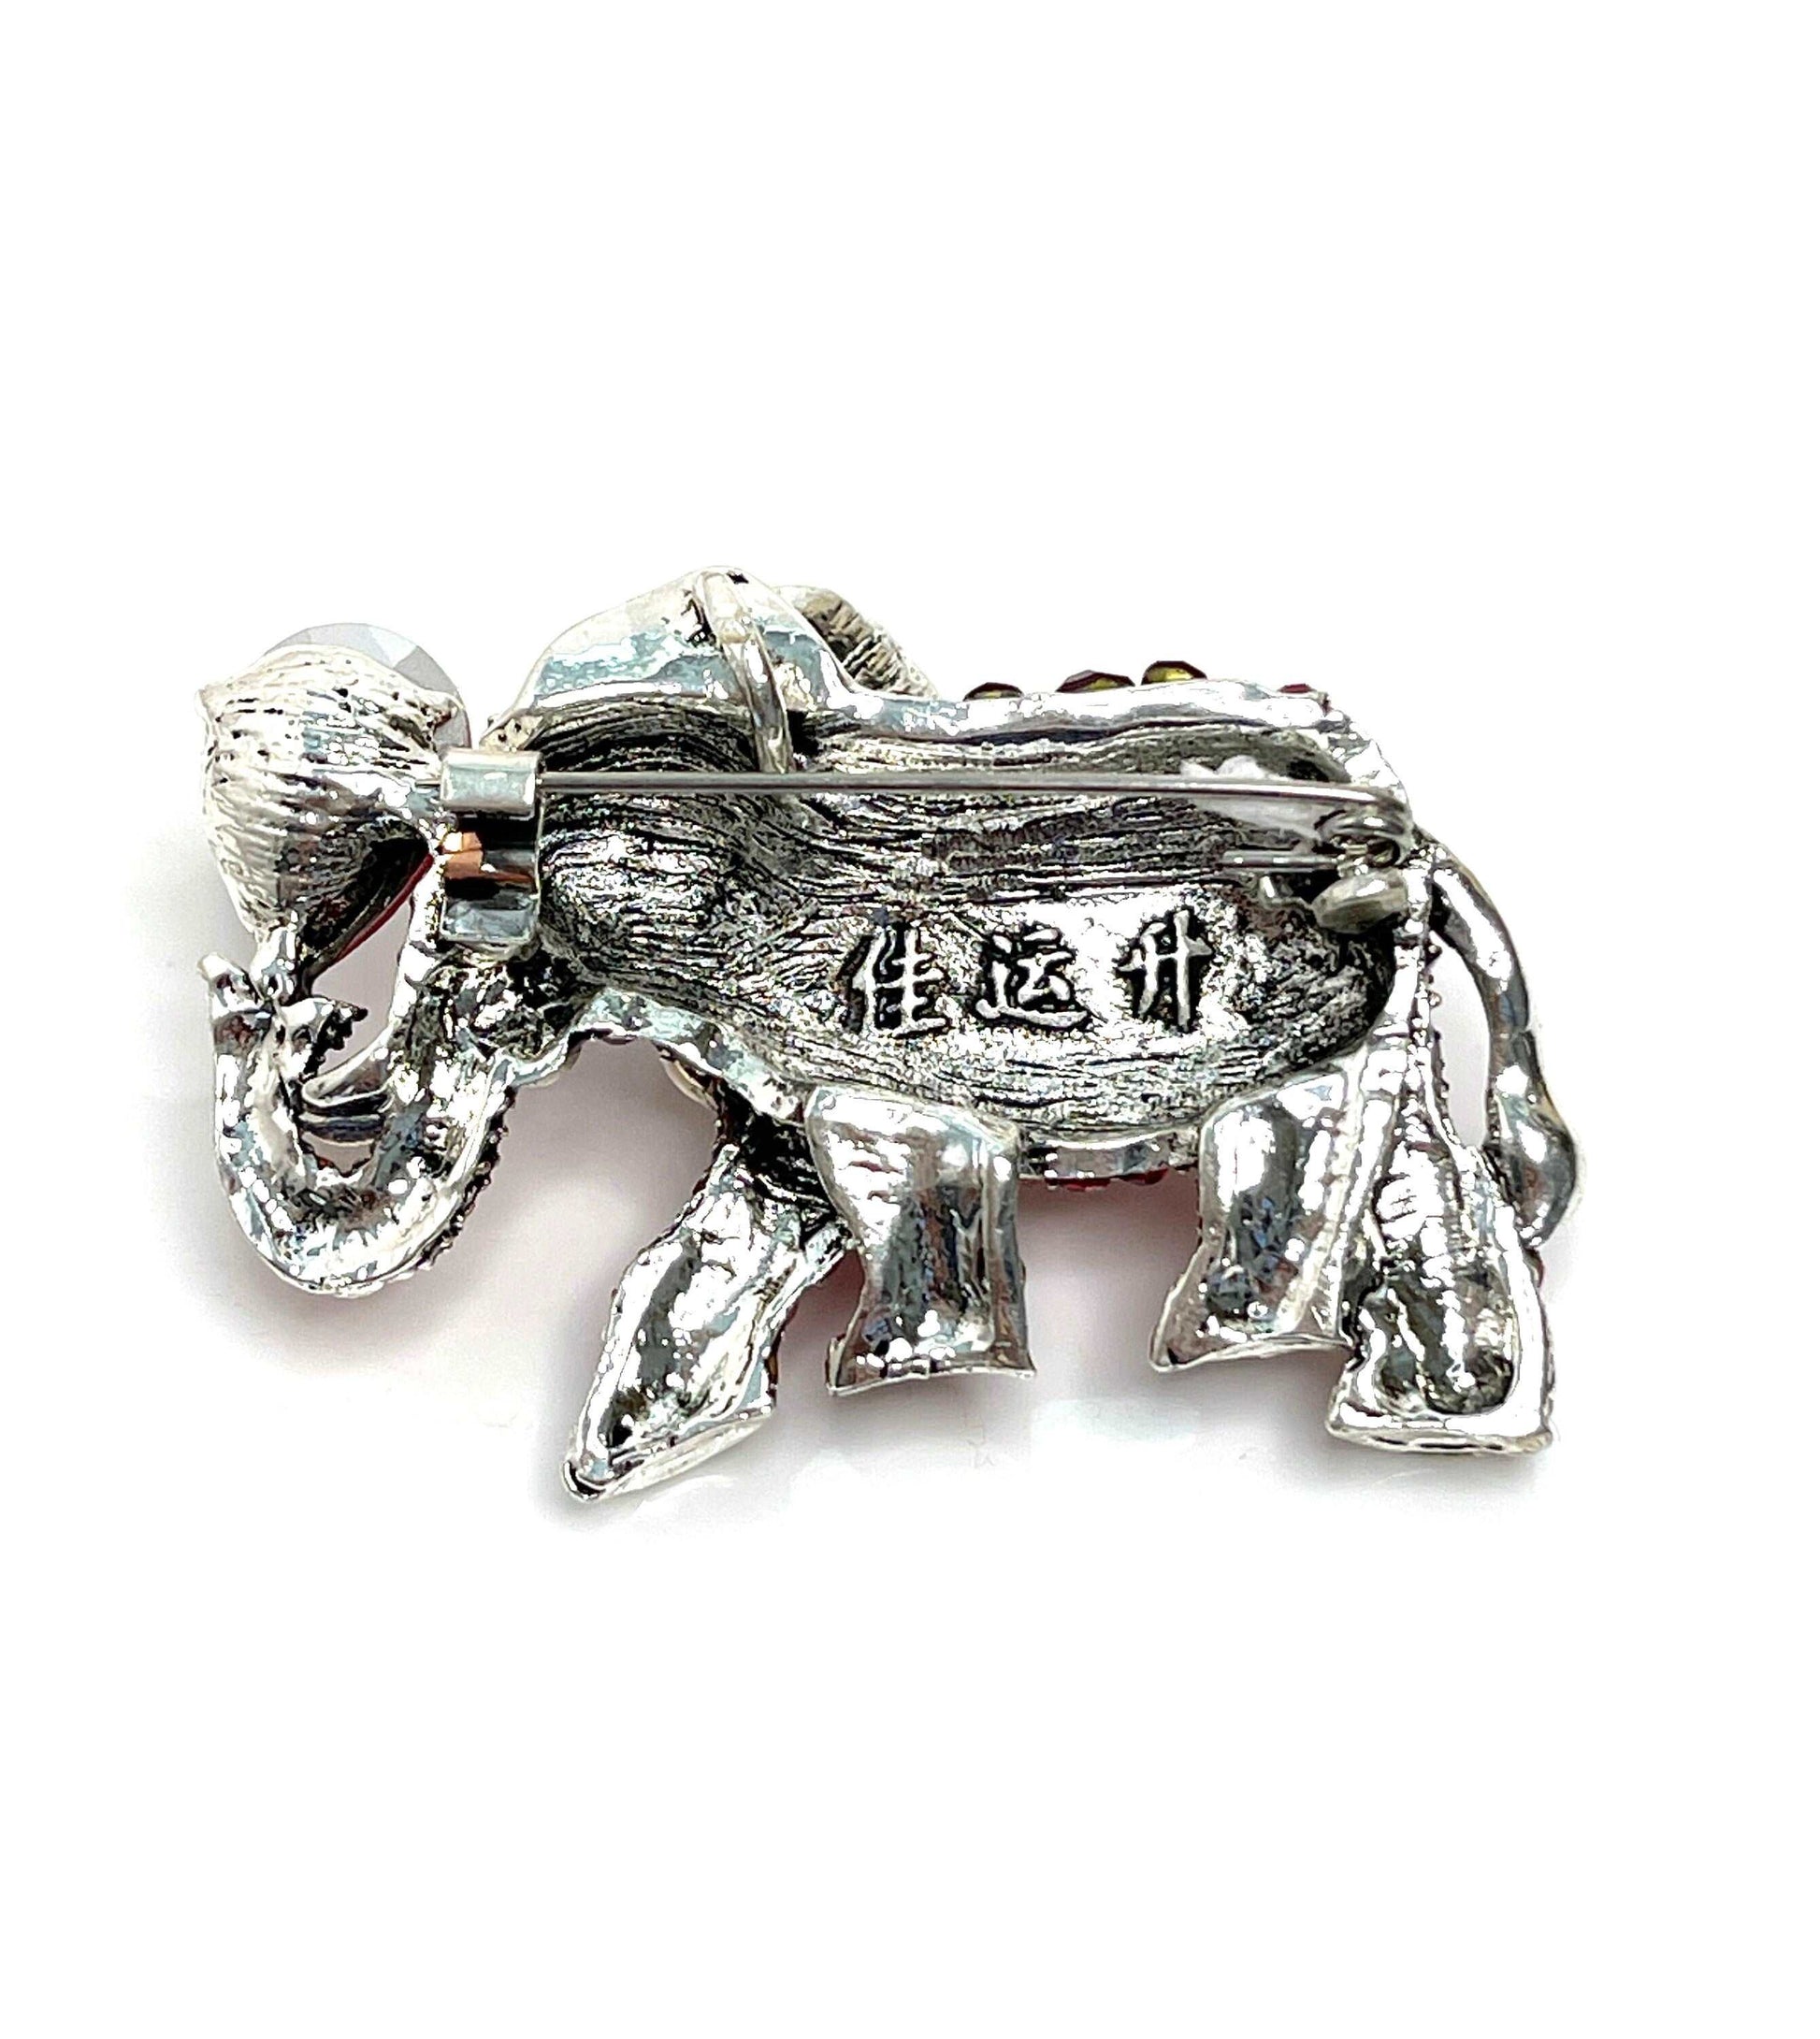 Large Purple Indian Elephant Brooch, Sparkly Elephant Pin, Crystal Animal Pin, Multi Crystal Diamonte Pin, Brooches For Women